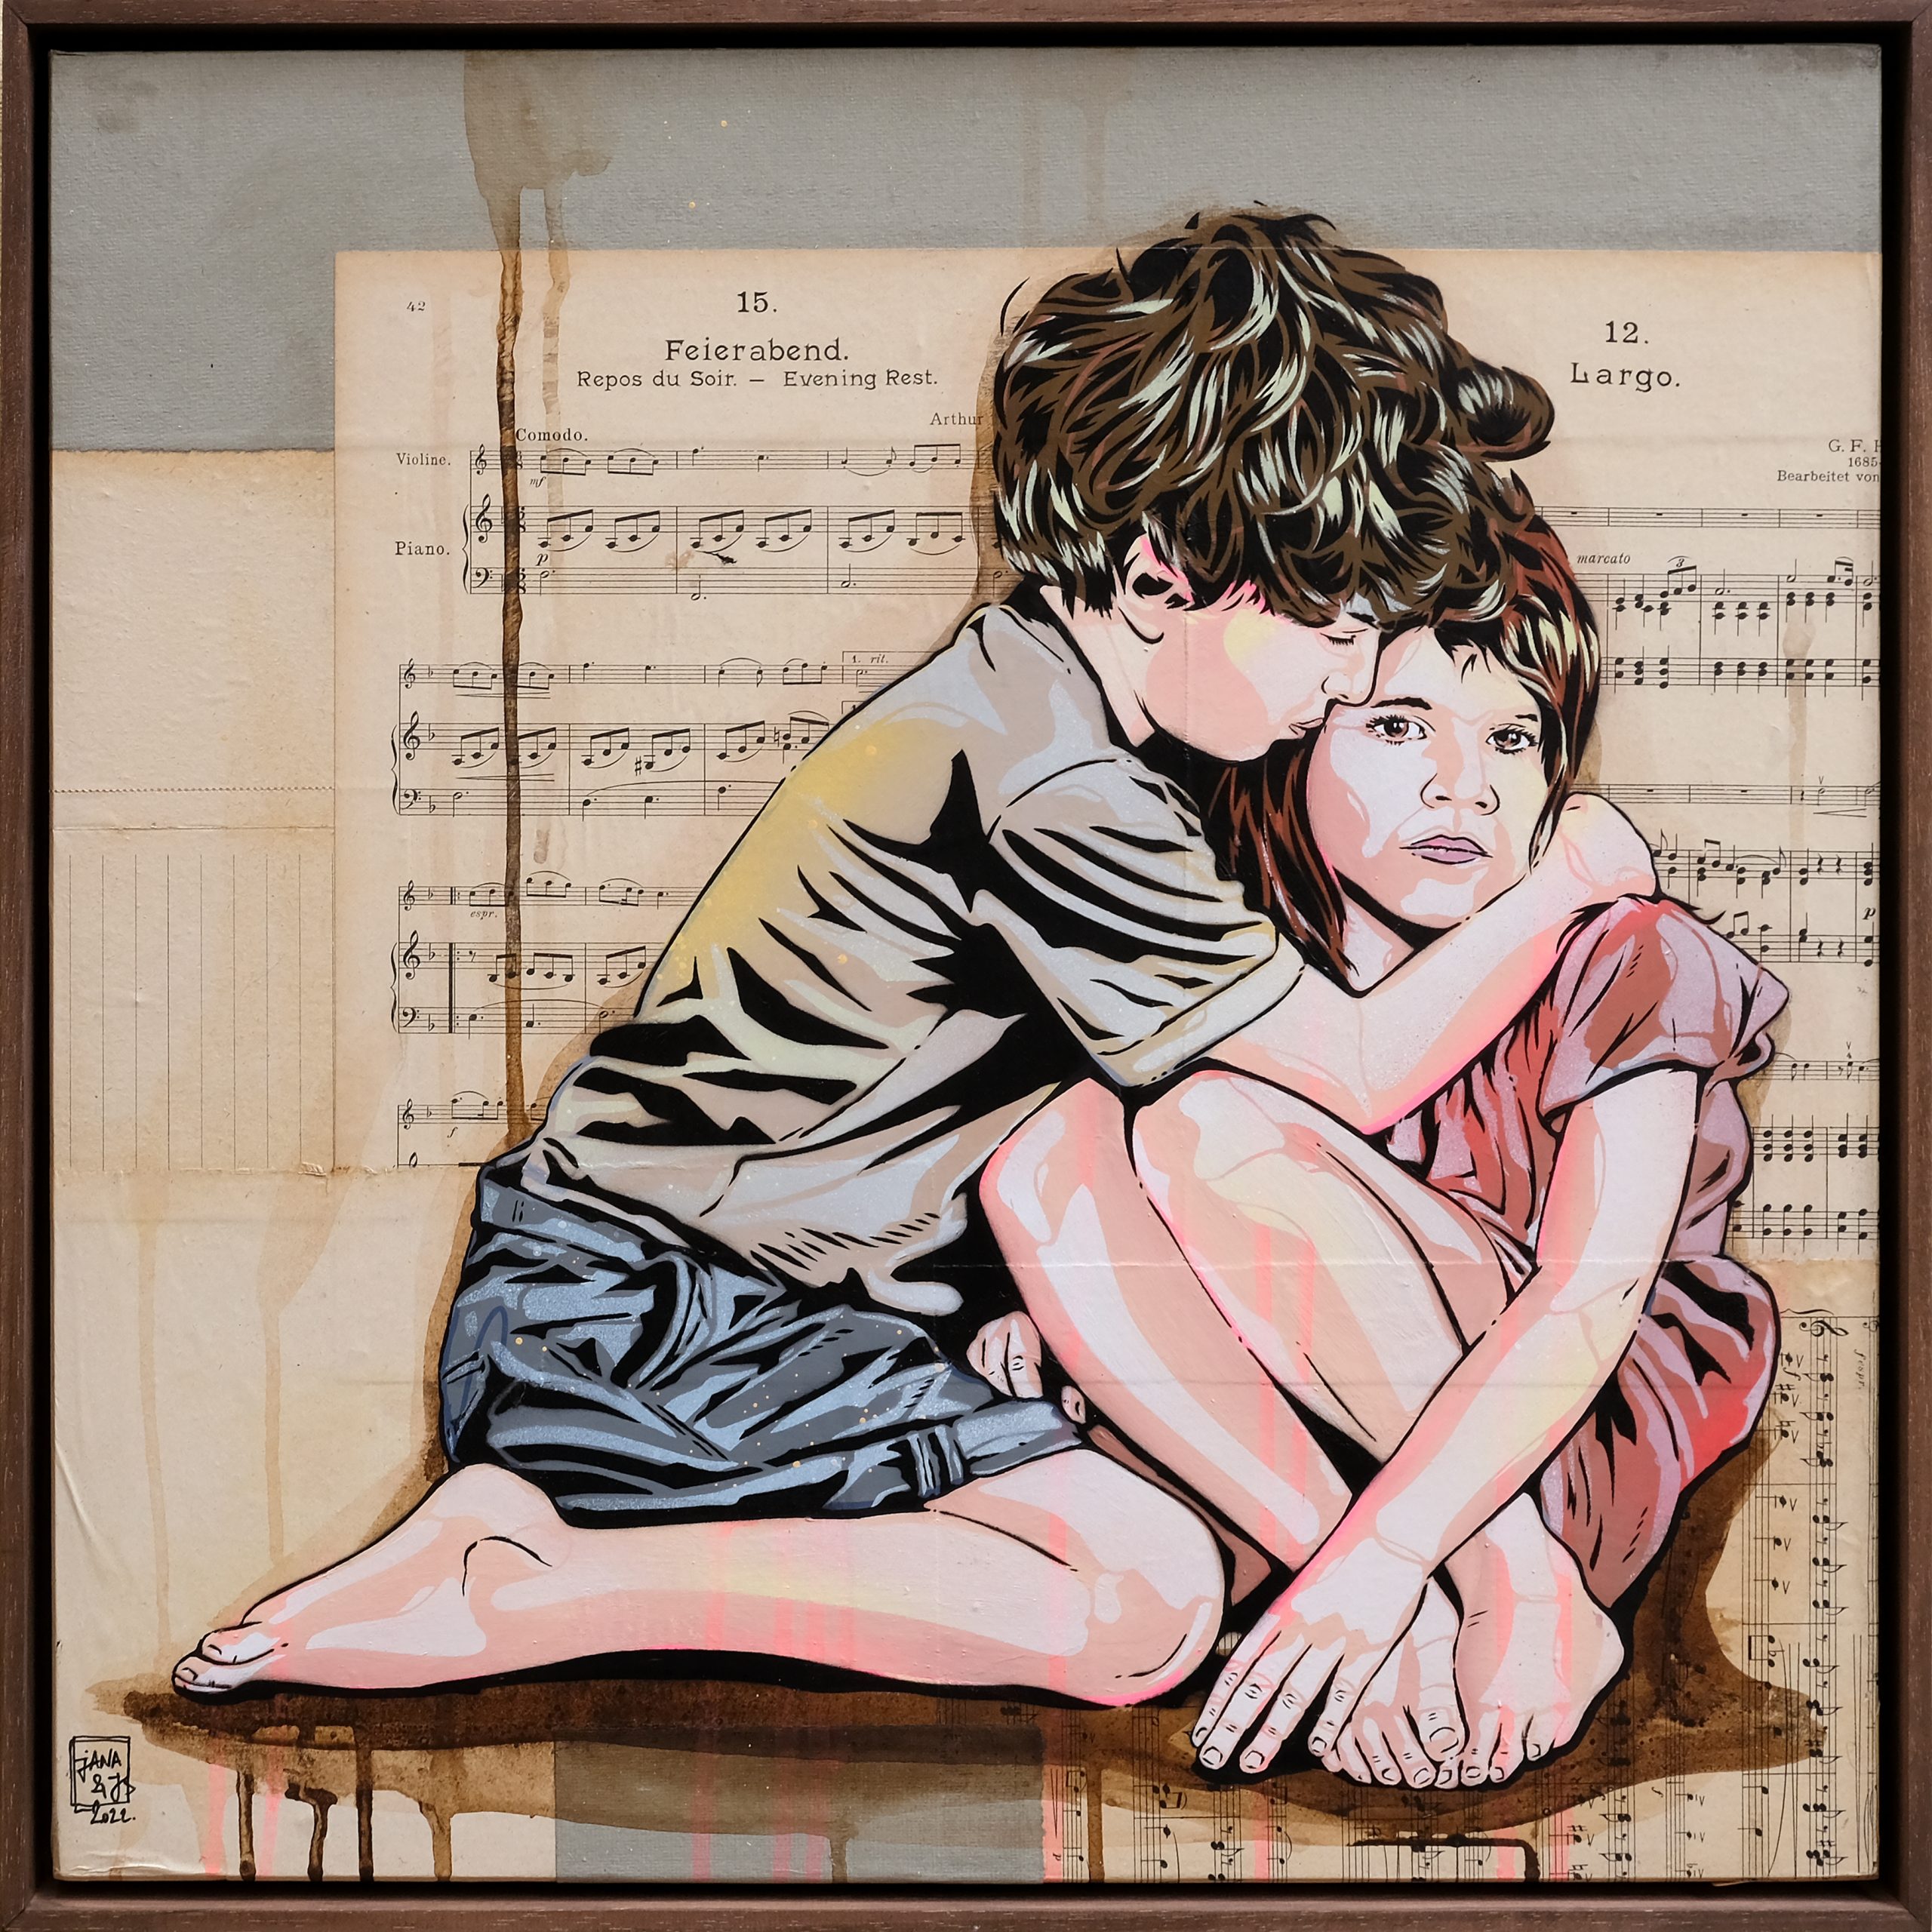 Jana & Js, Je suis là, 50x50 cm, Acrylic, Ink, Spaypaint and stencil on vintage paper, mounted on wooden panel, 2021